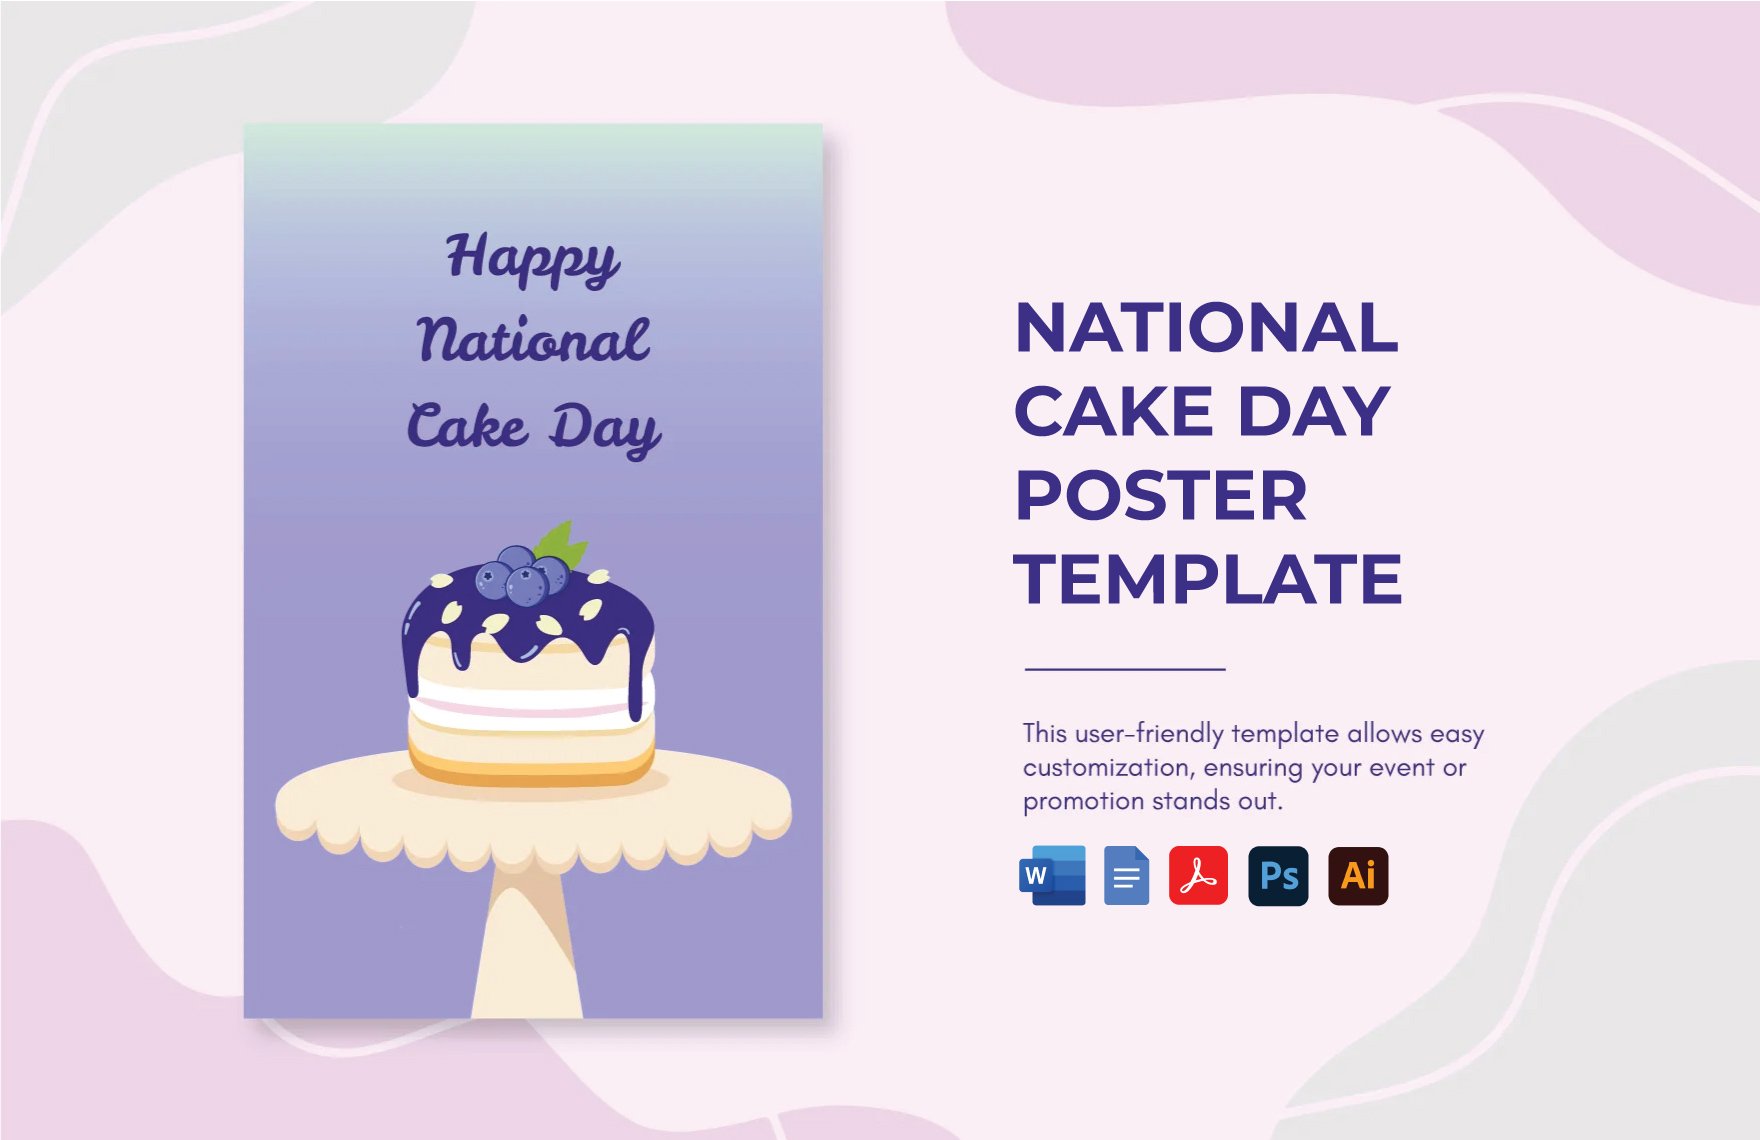 National Cake Day Poster Template